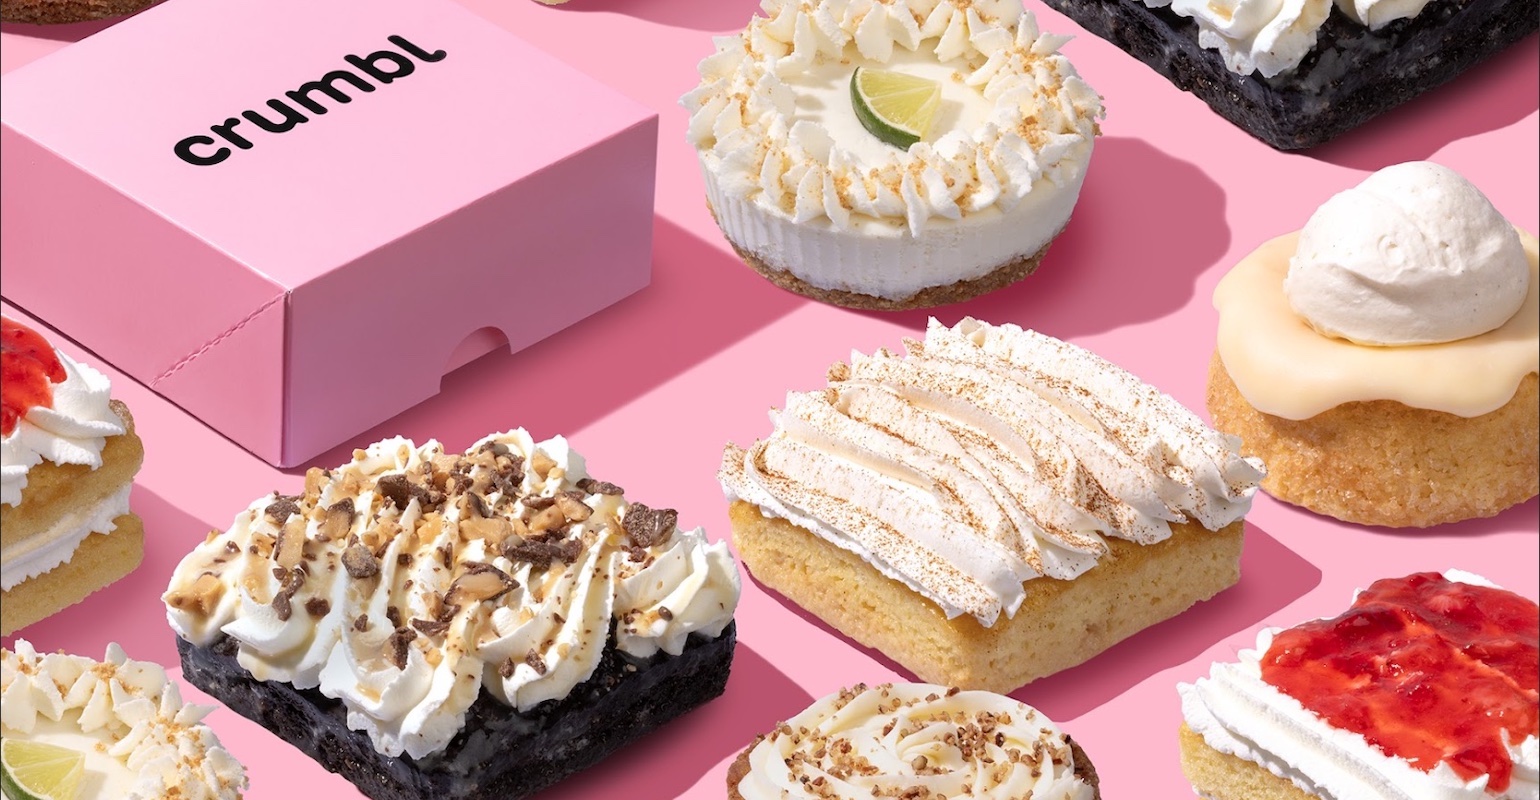 Crumbl expands menu with range of dessert items [Video]